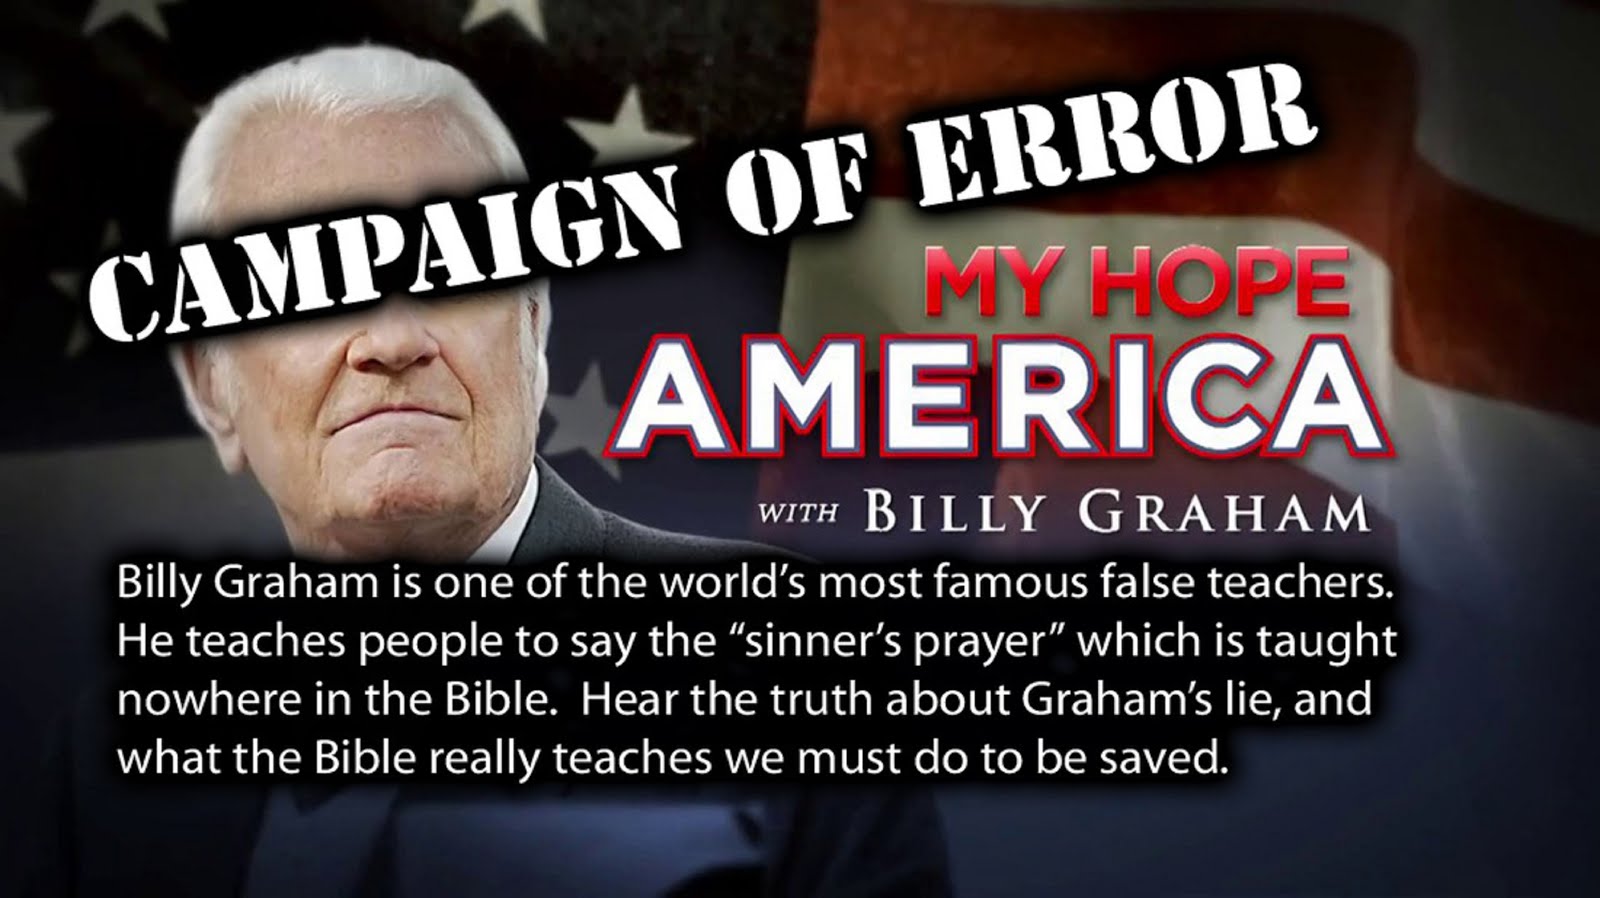 BILLY GRAHAM - CAMPAIGN OF ERROR